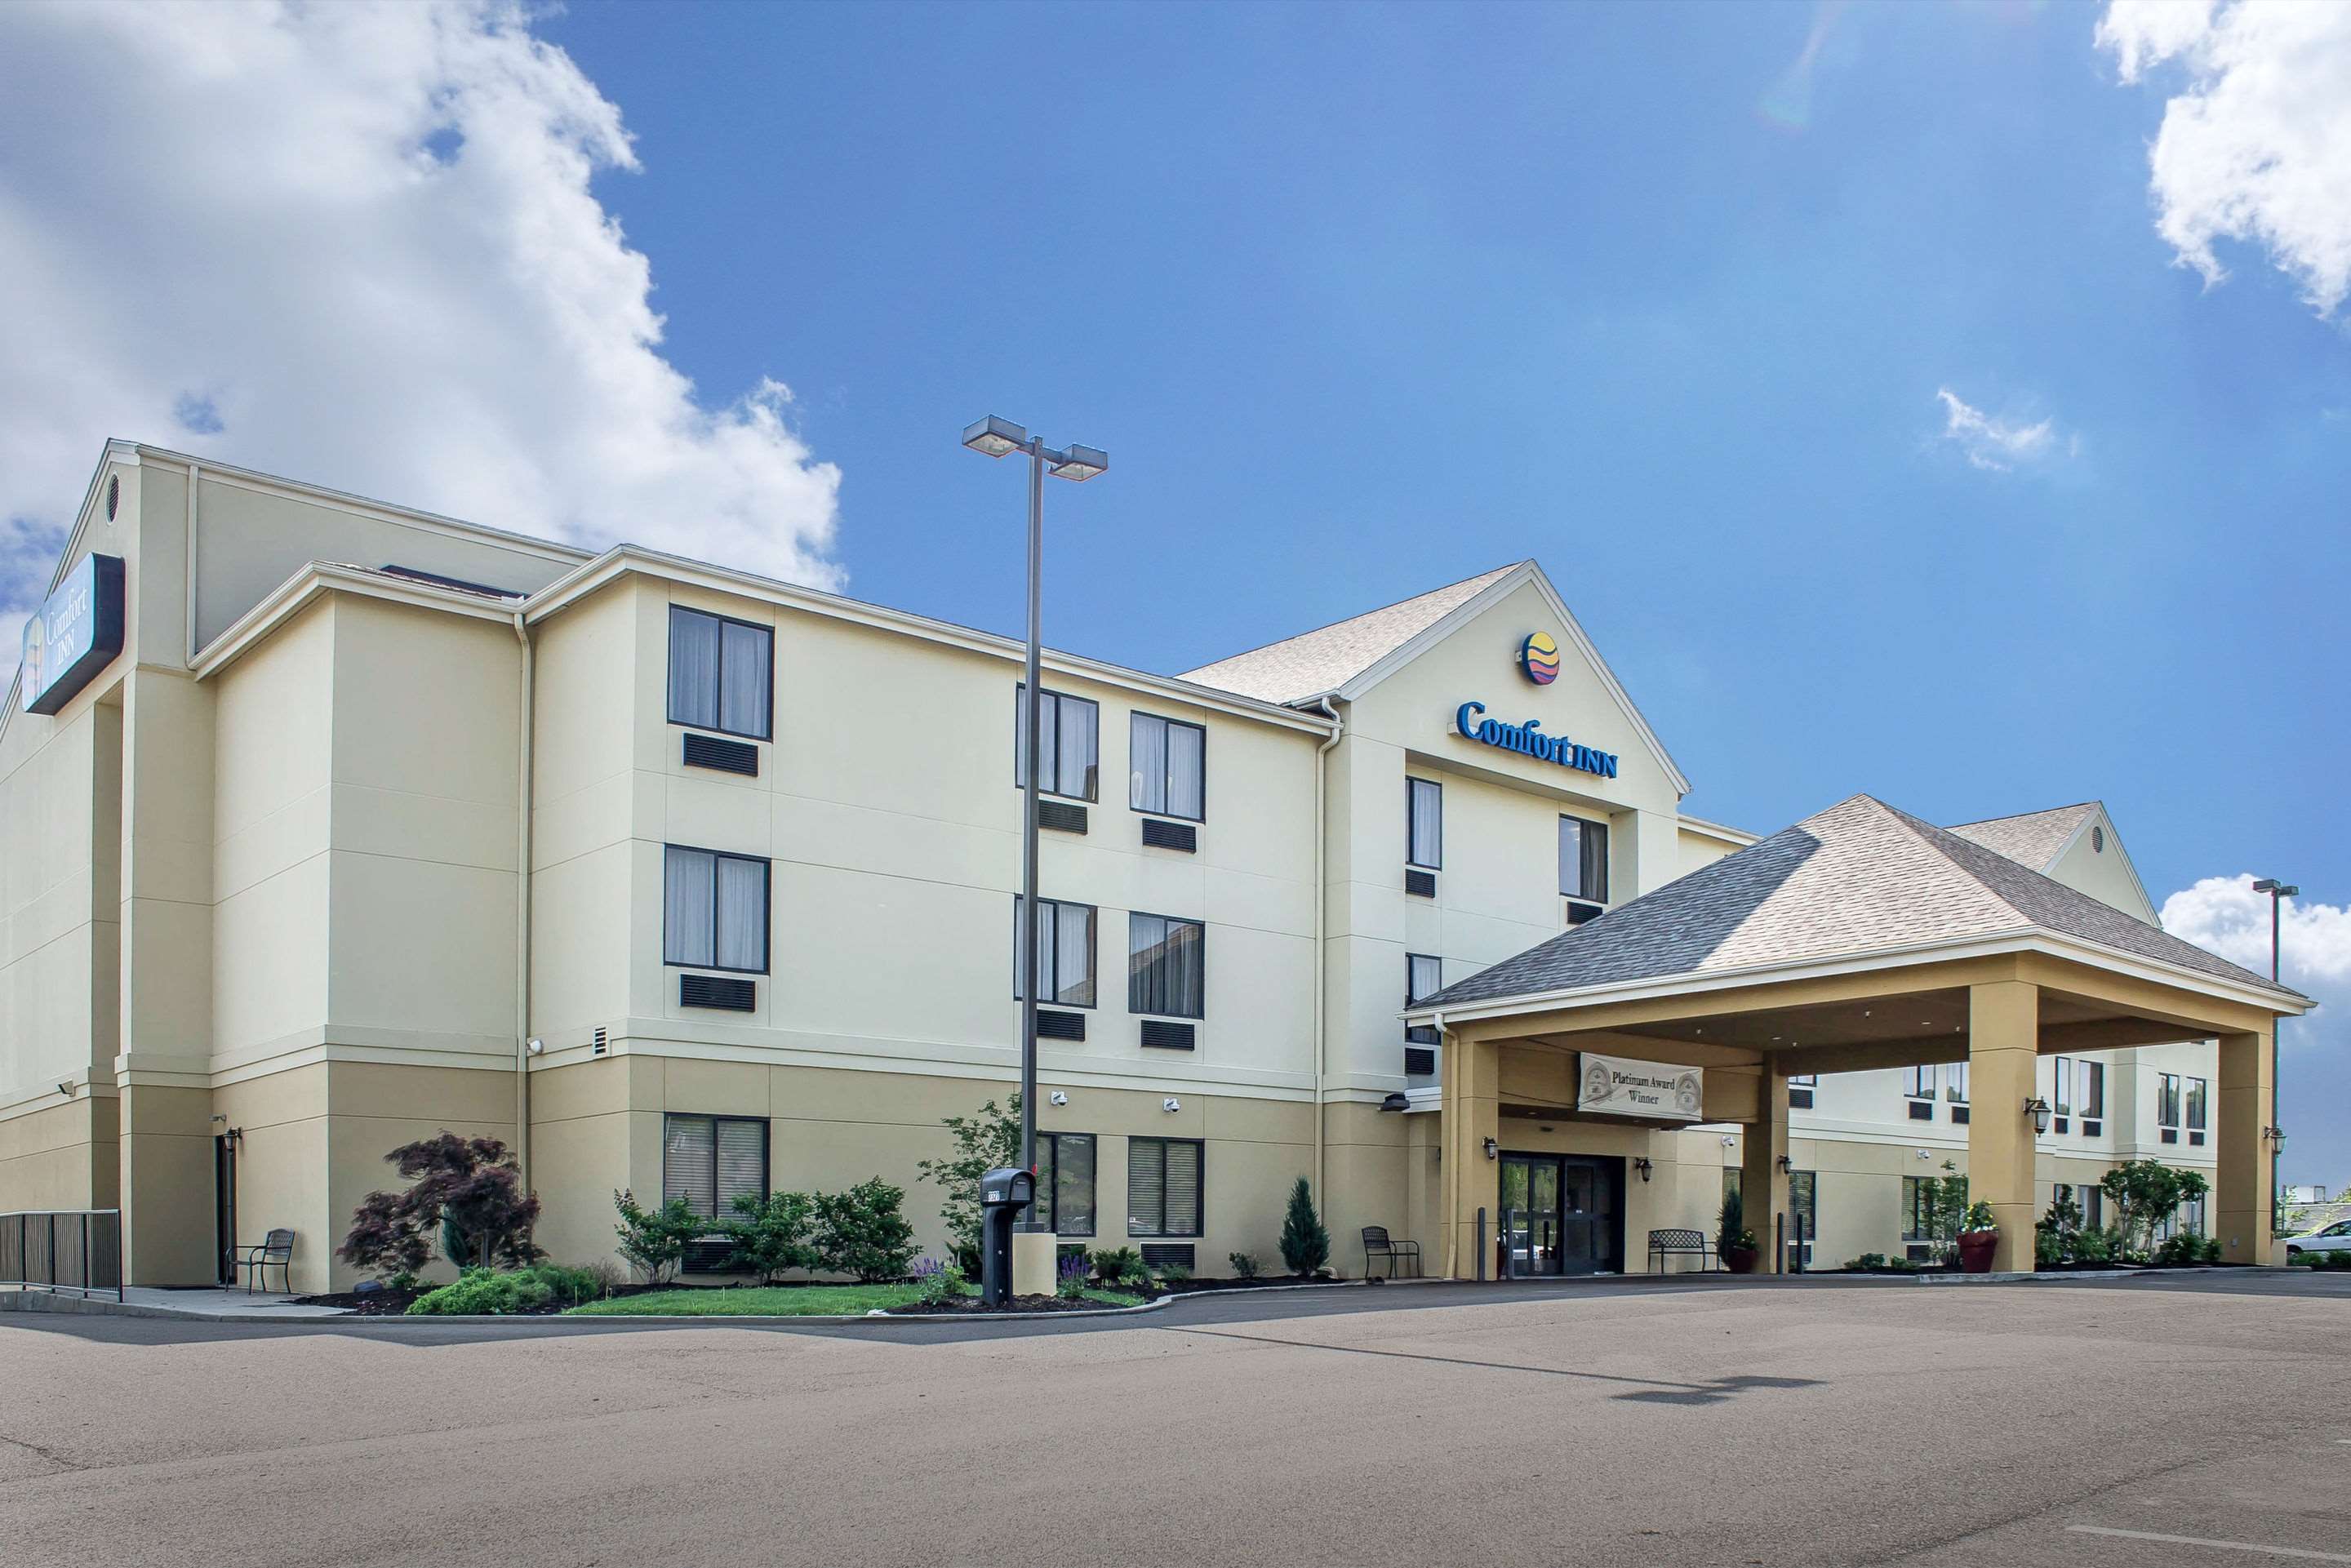 Picture of a place: Comfort Inn